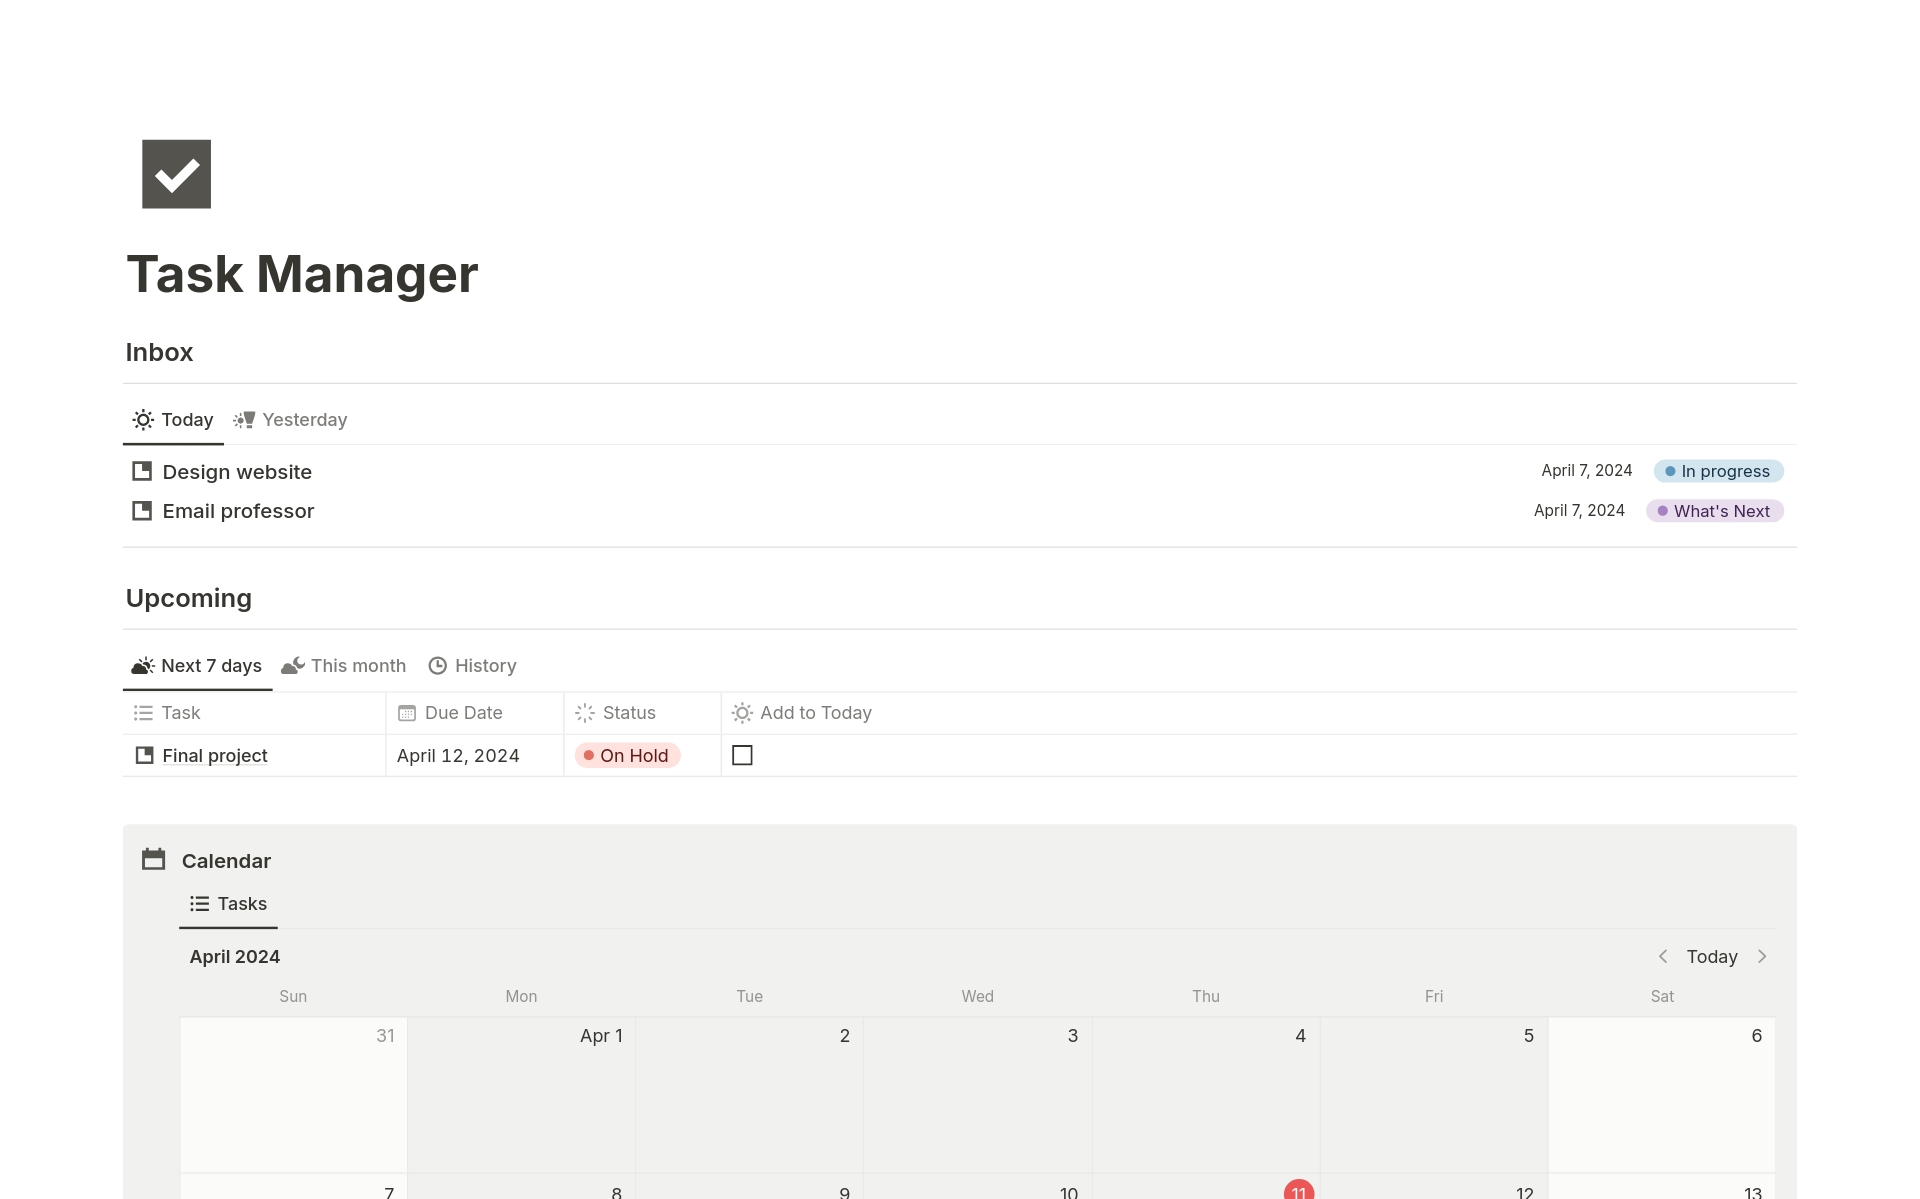 Task Manager Overview:

This Notion Task Manager template is a powerful productivity tool designed for efficient task management.